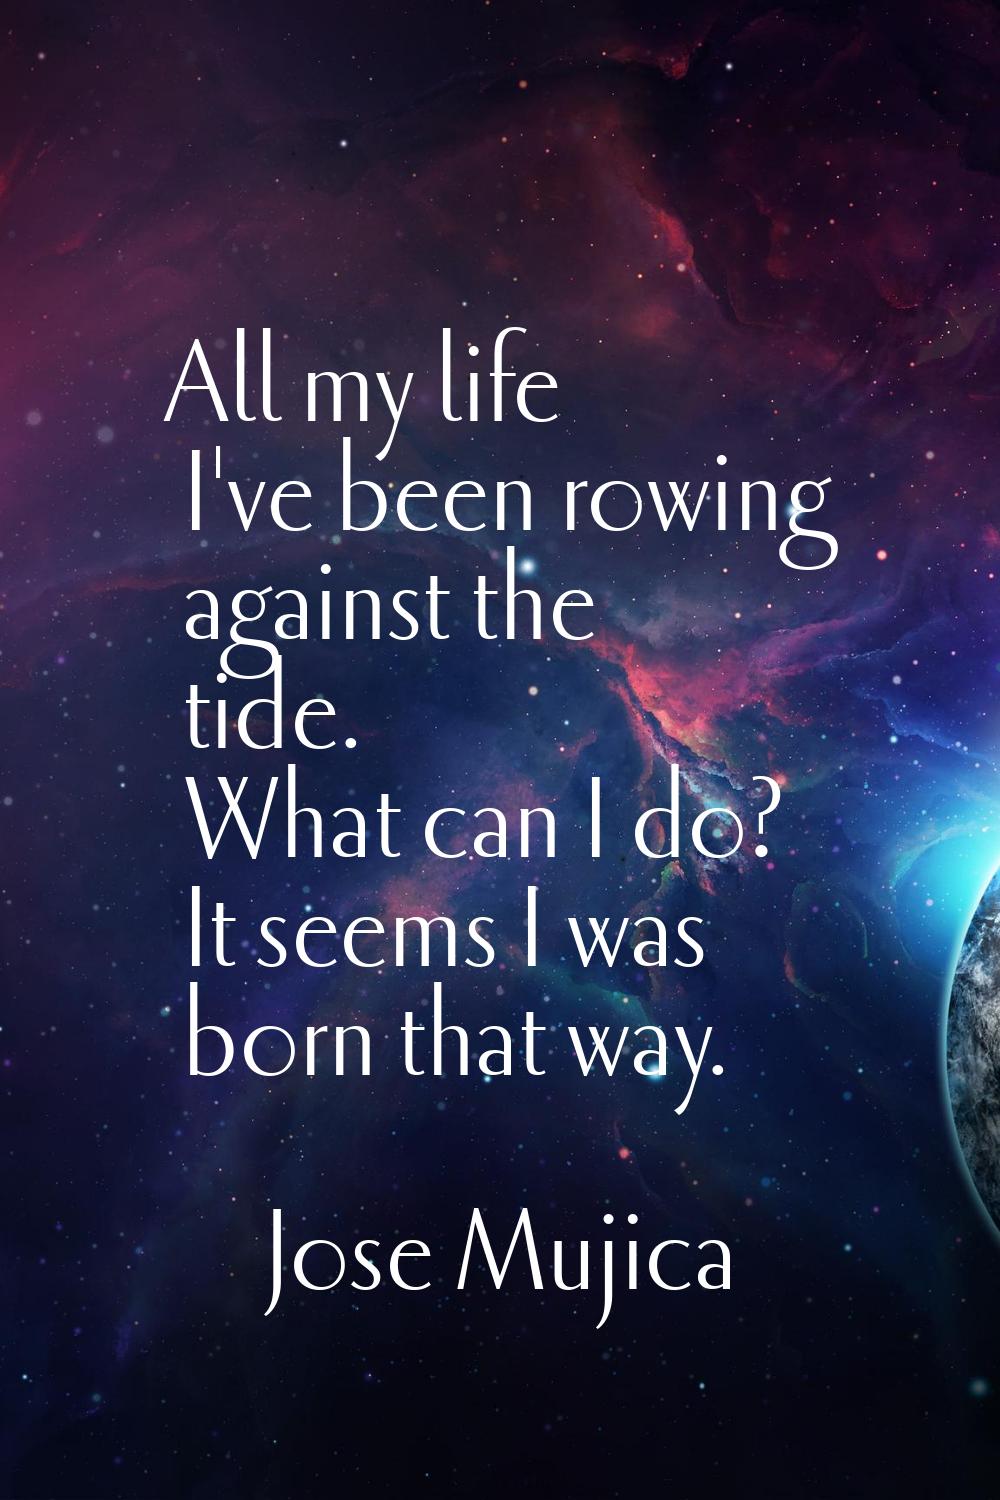 All my life I've been rowing against the tide. What can I do? It seems I was born that way.